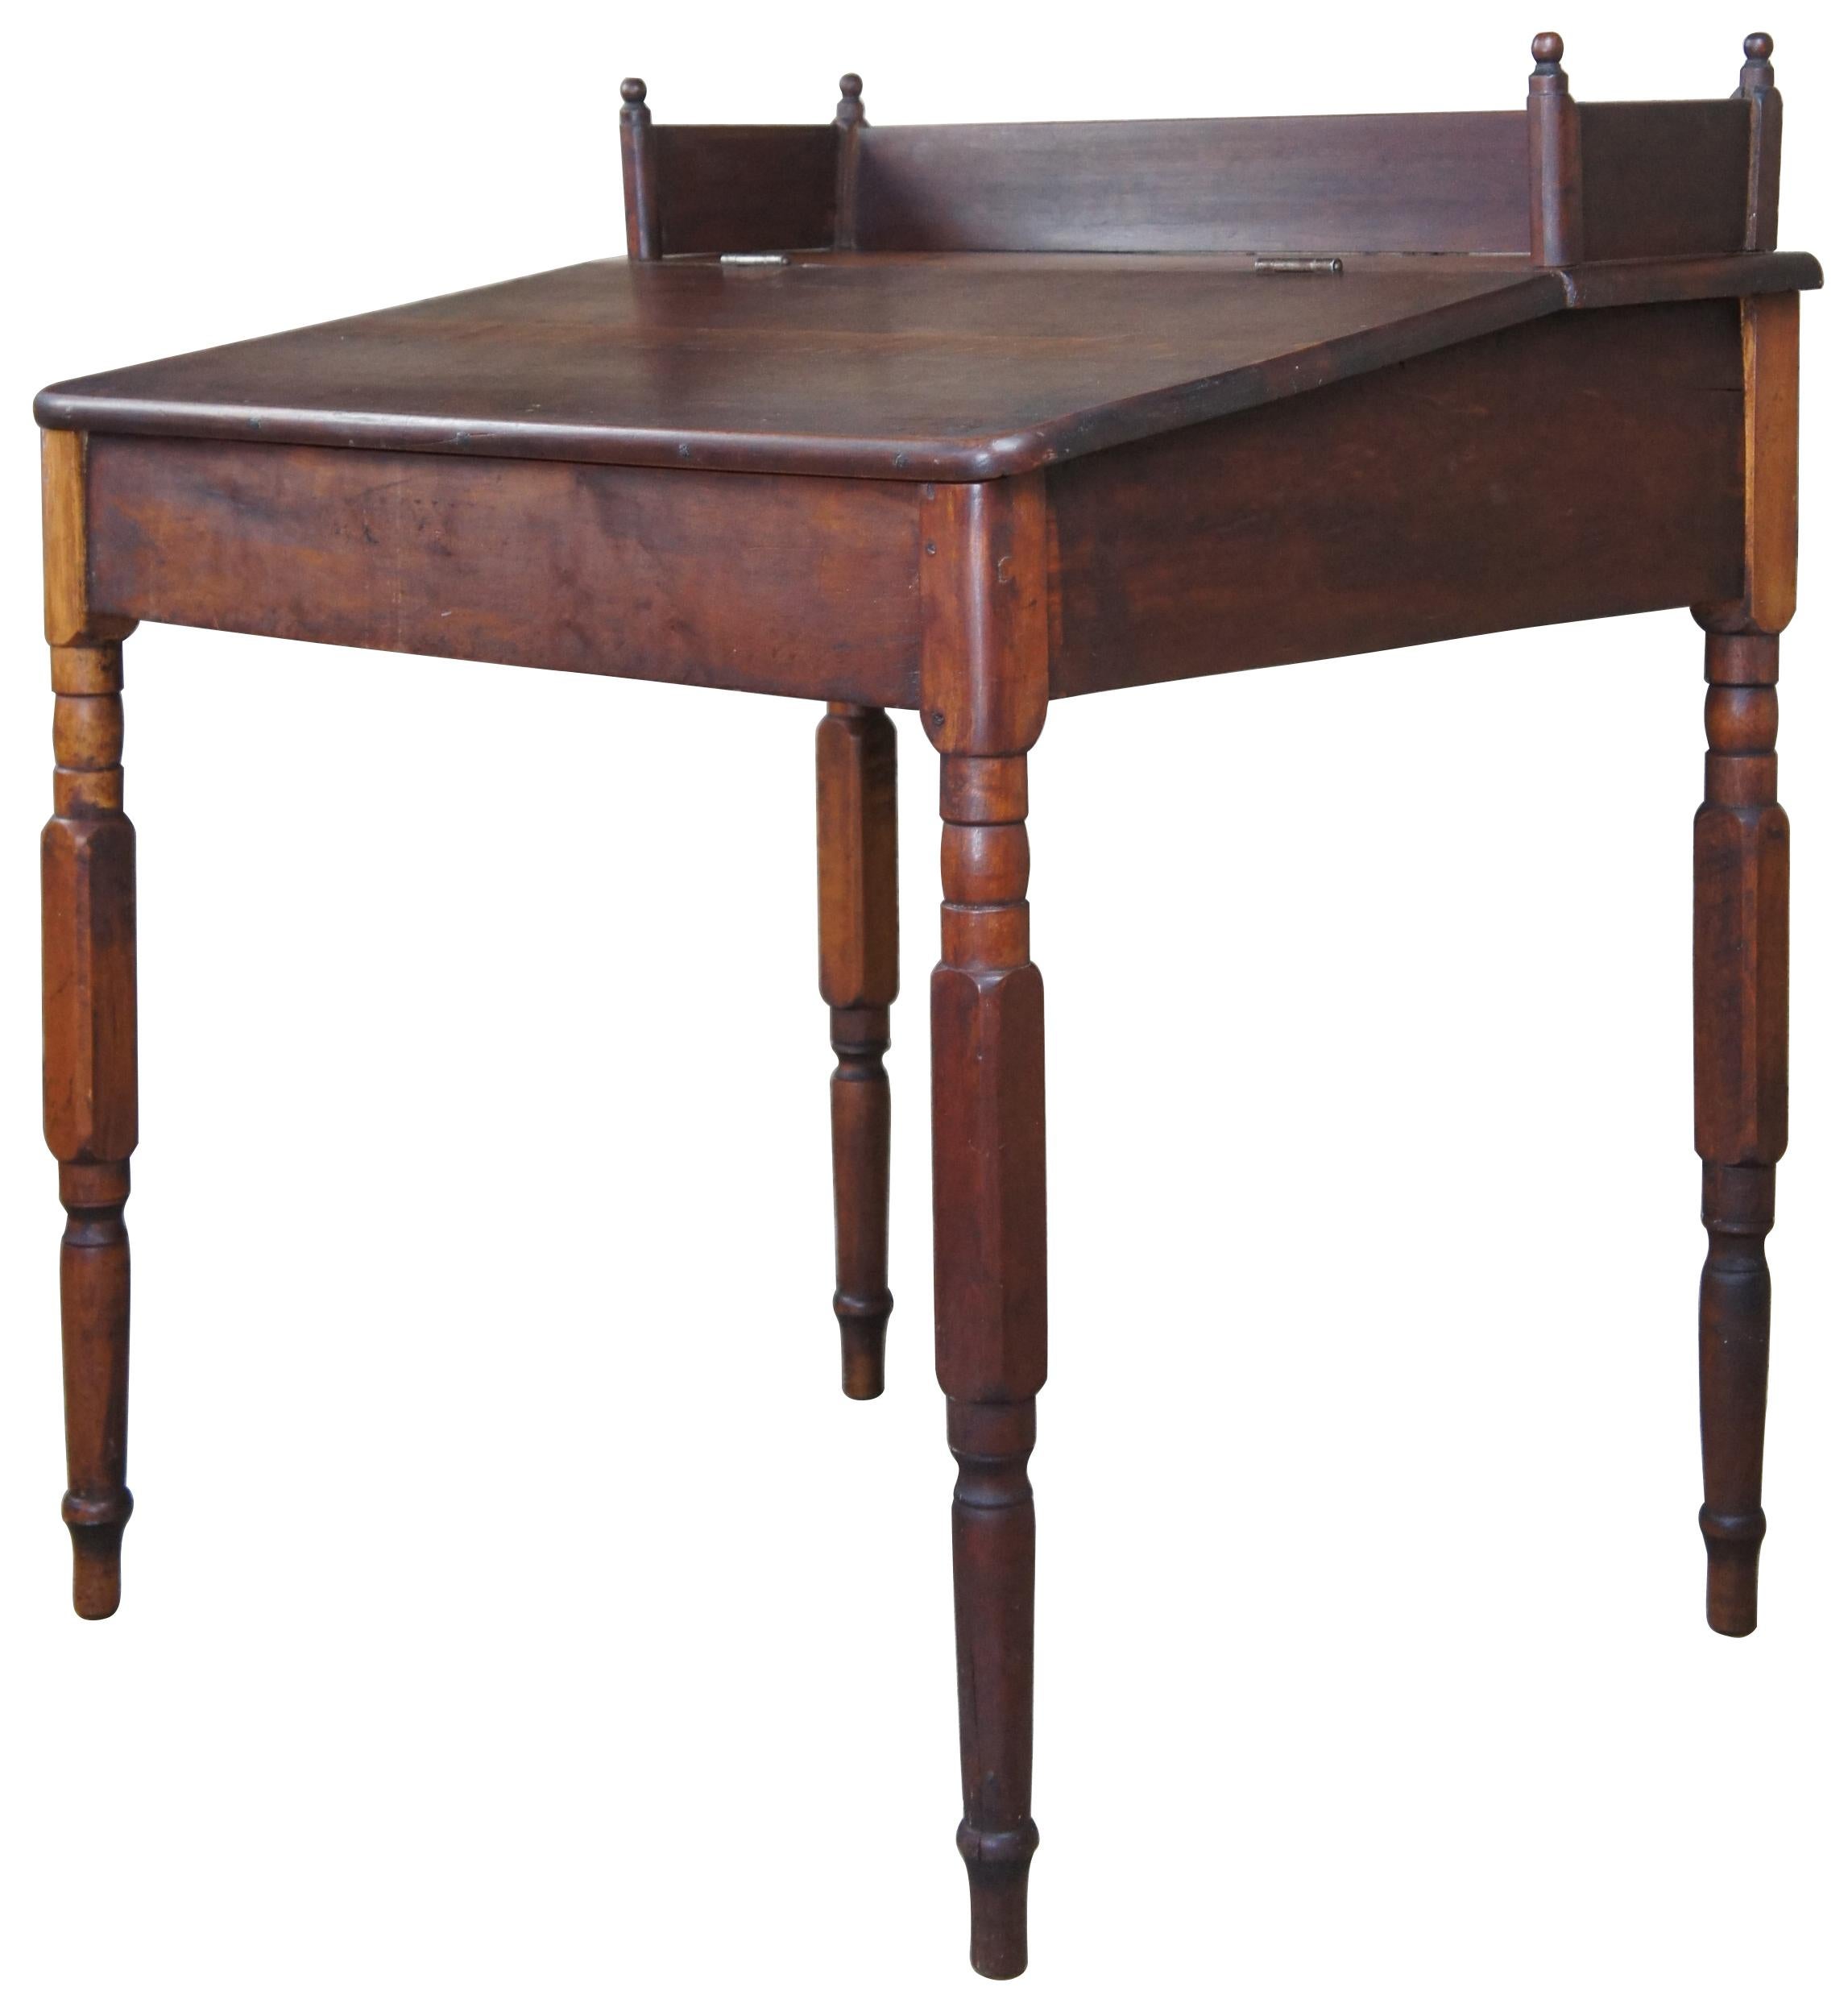 A charming 19th century slant top writing desk. Made from cherry with turned legs leading to peg feet. Features a backsplash with turned finials and large storage area underneath top. Measures: 37”.
 